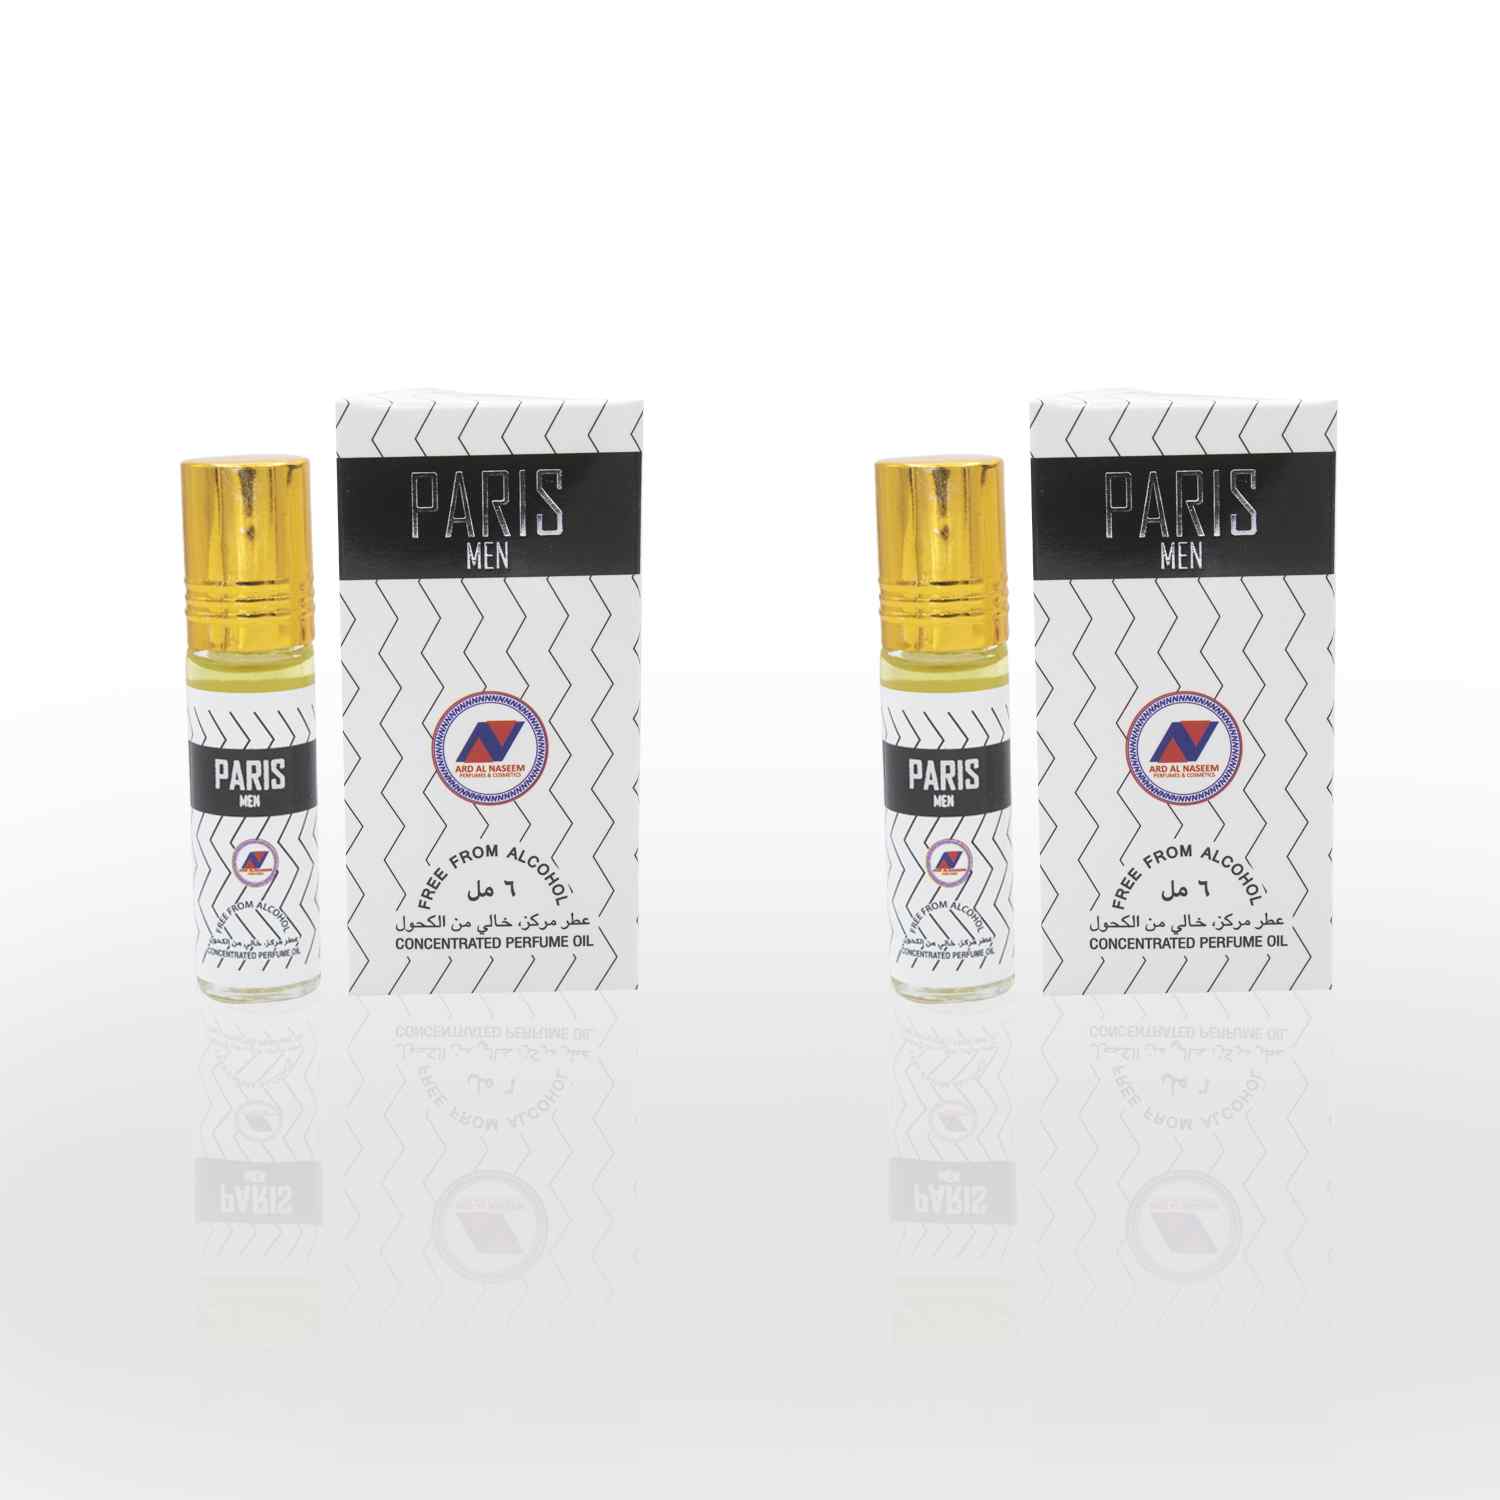 Paris Men concentrated oil attar rollon 6ml by Ard perfumes